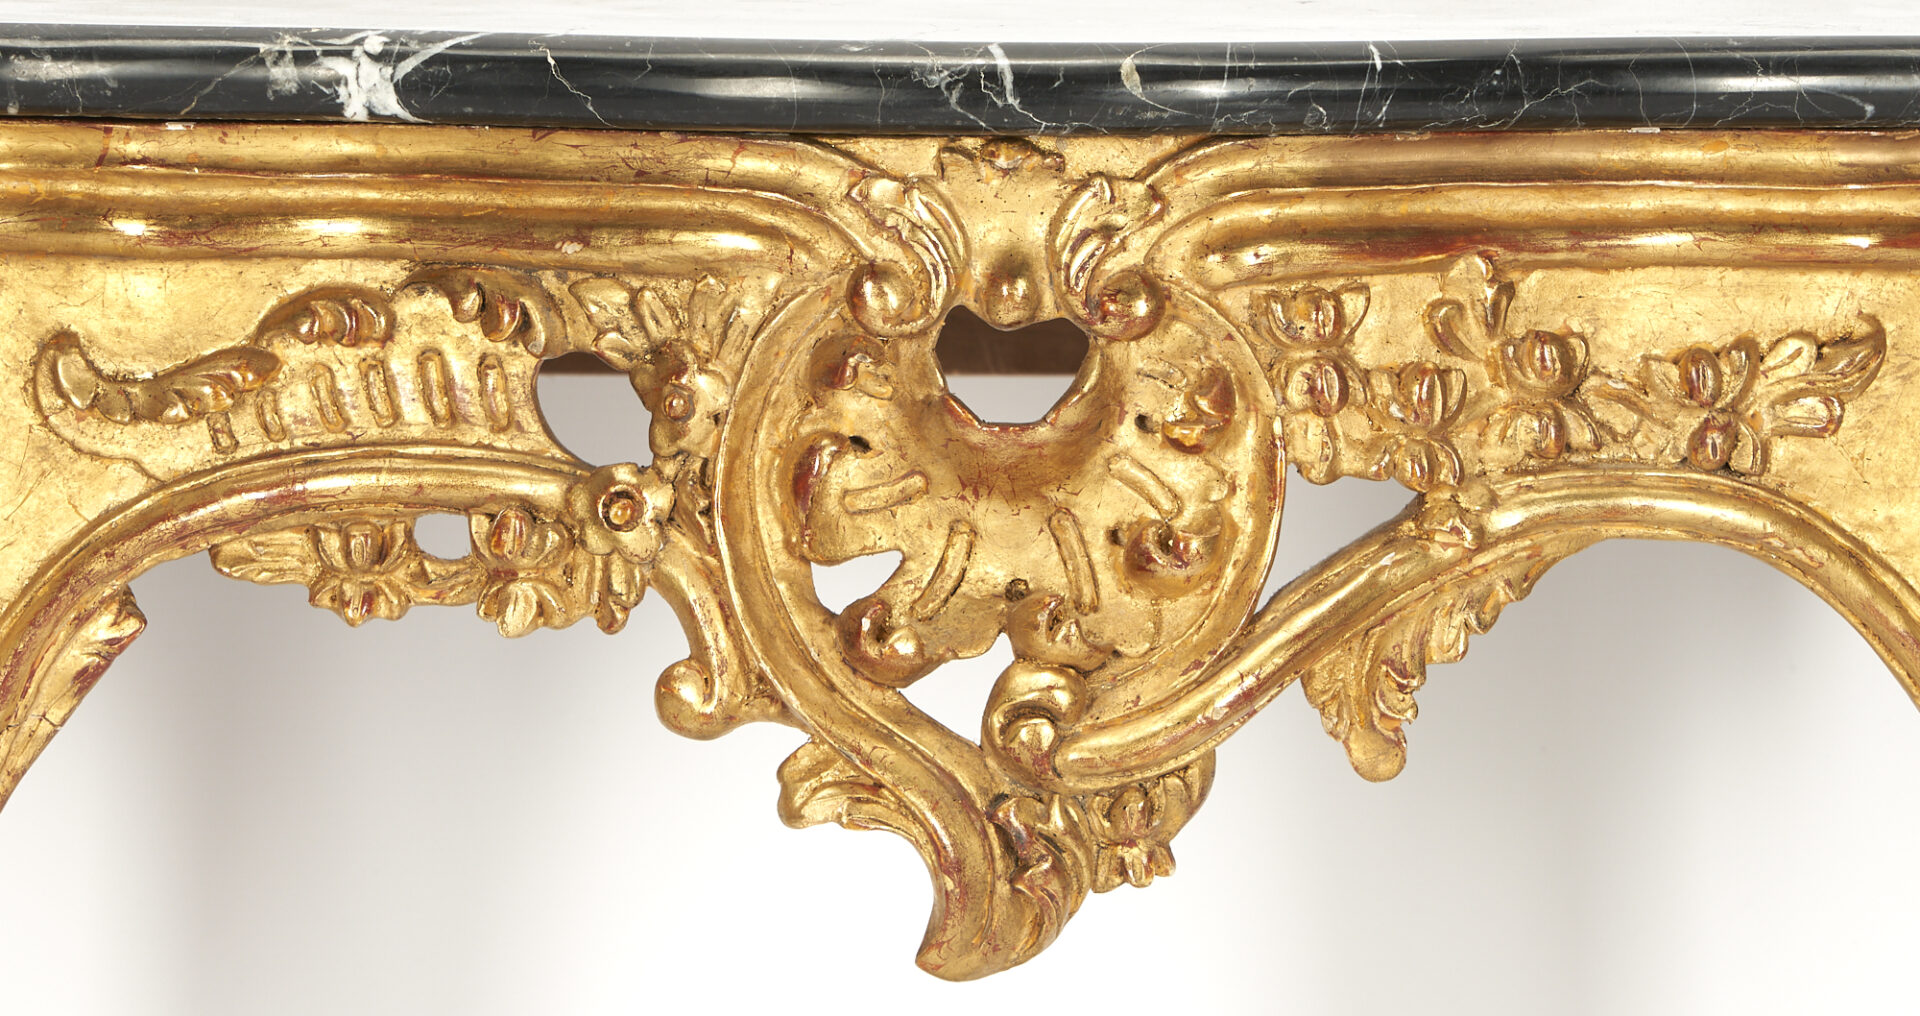 Lot 648: Small Louis XV style Giltwood Console Table, Black Marble Top